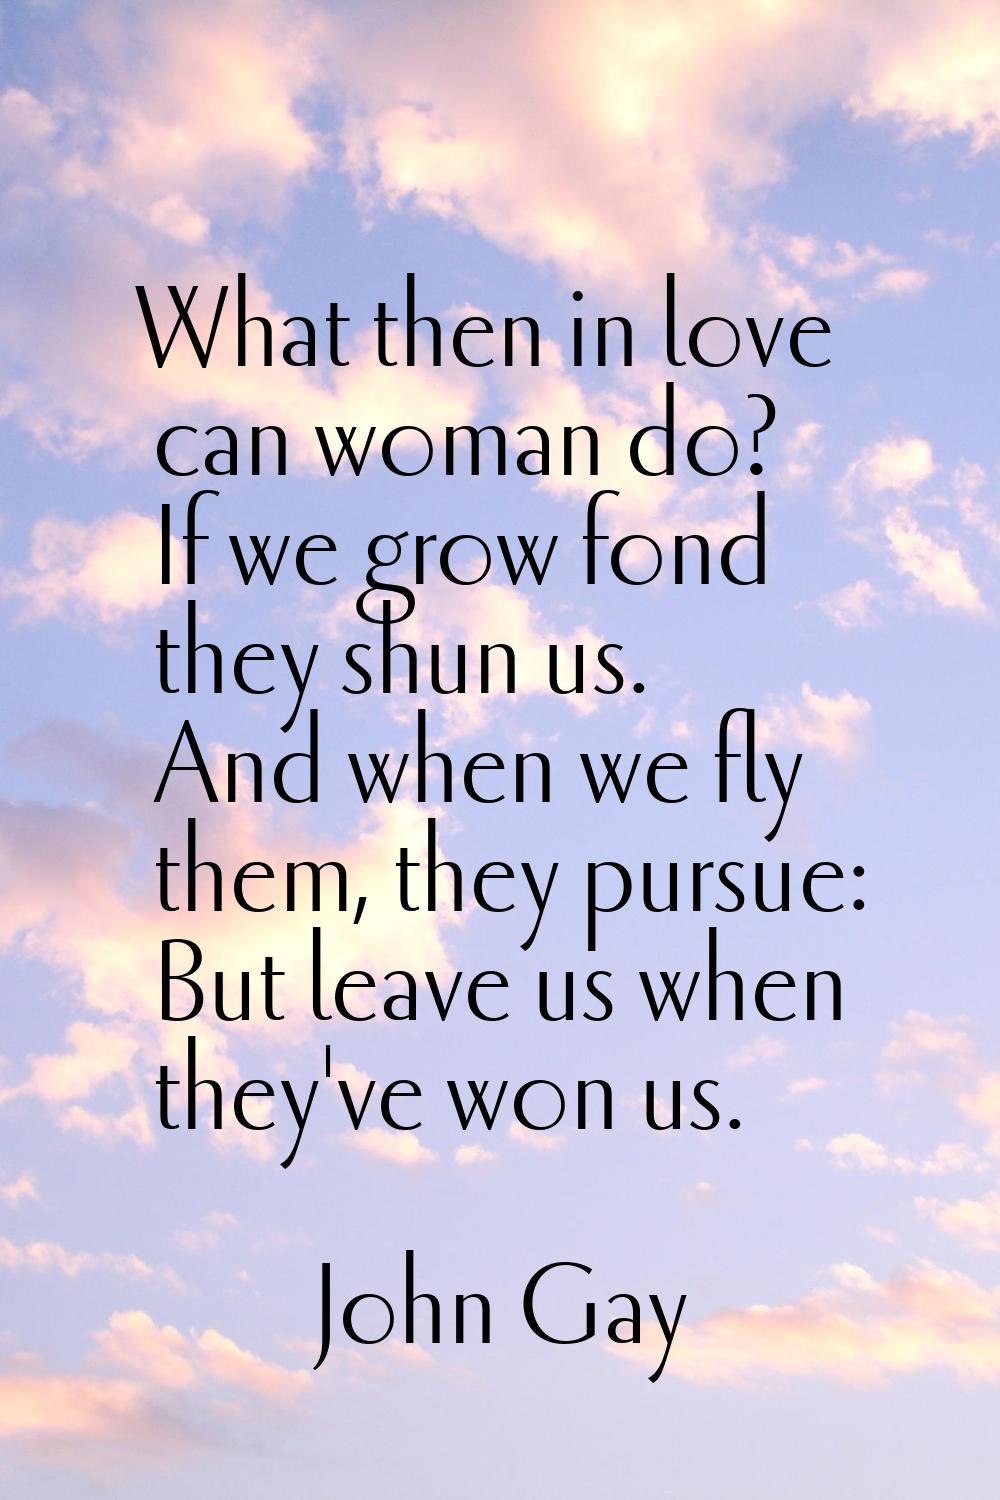 What then in love can woman do? If we grow fond they shun us. And when we fly them, they pursue: Bu